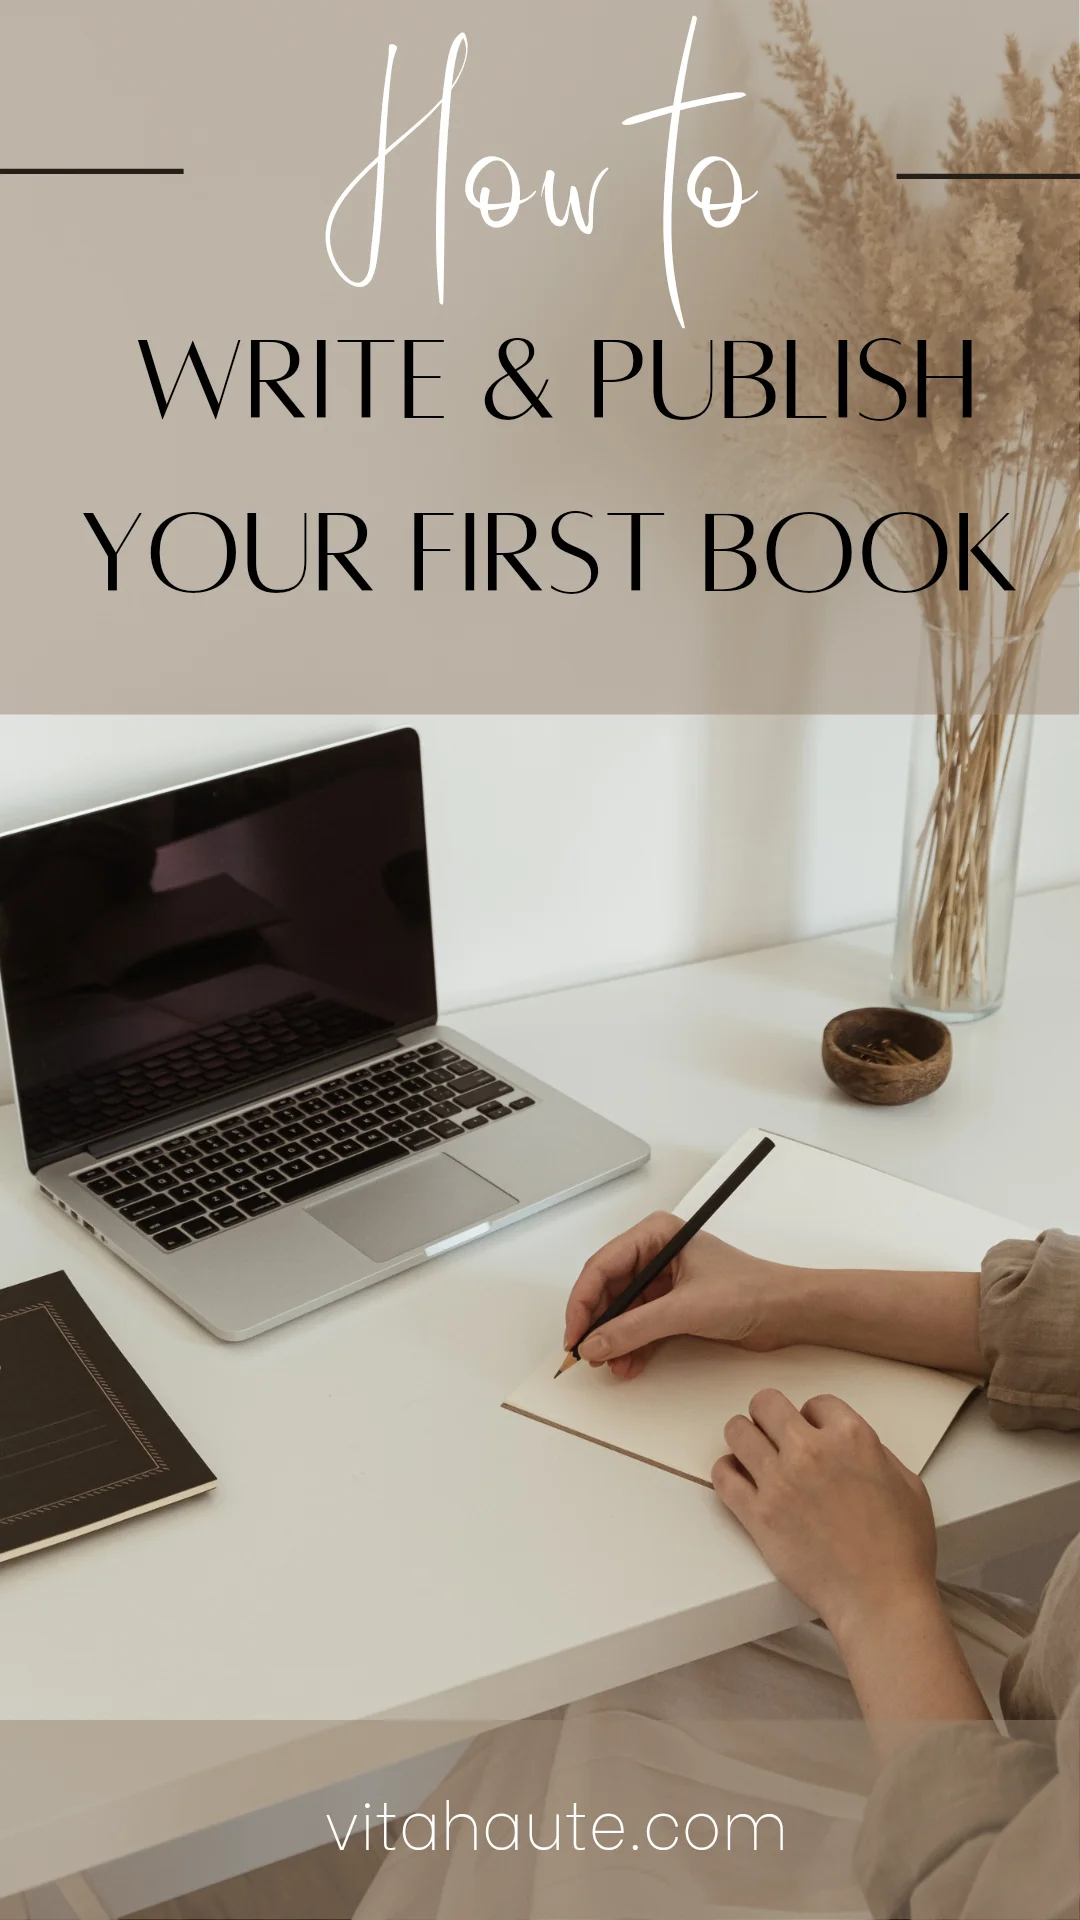 How to write and publish your first book